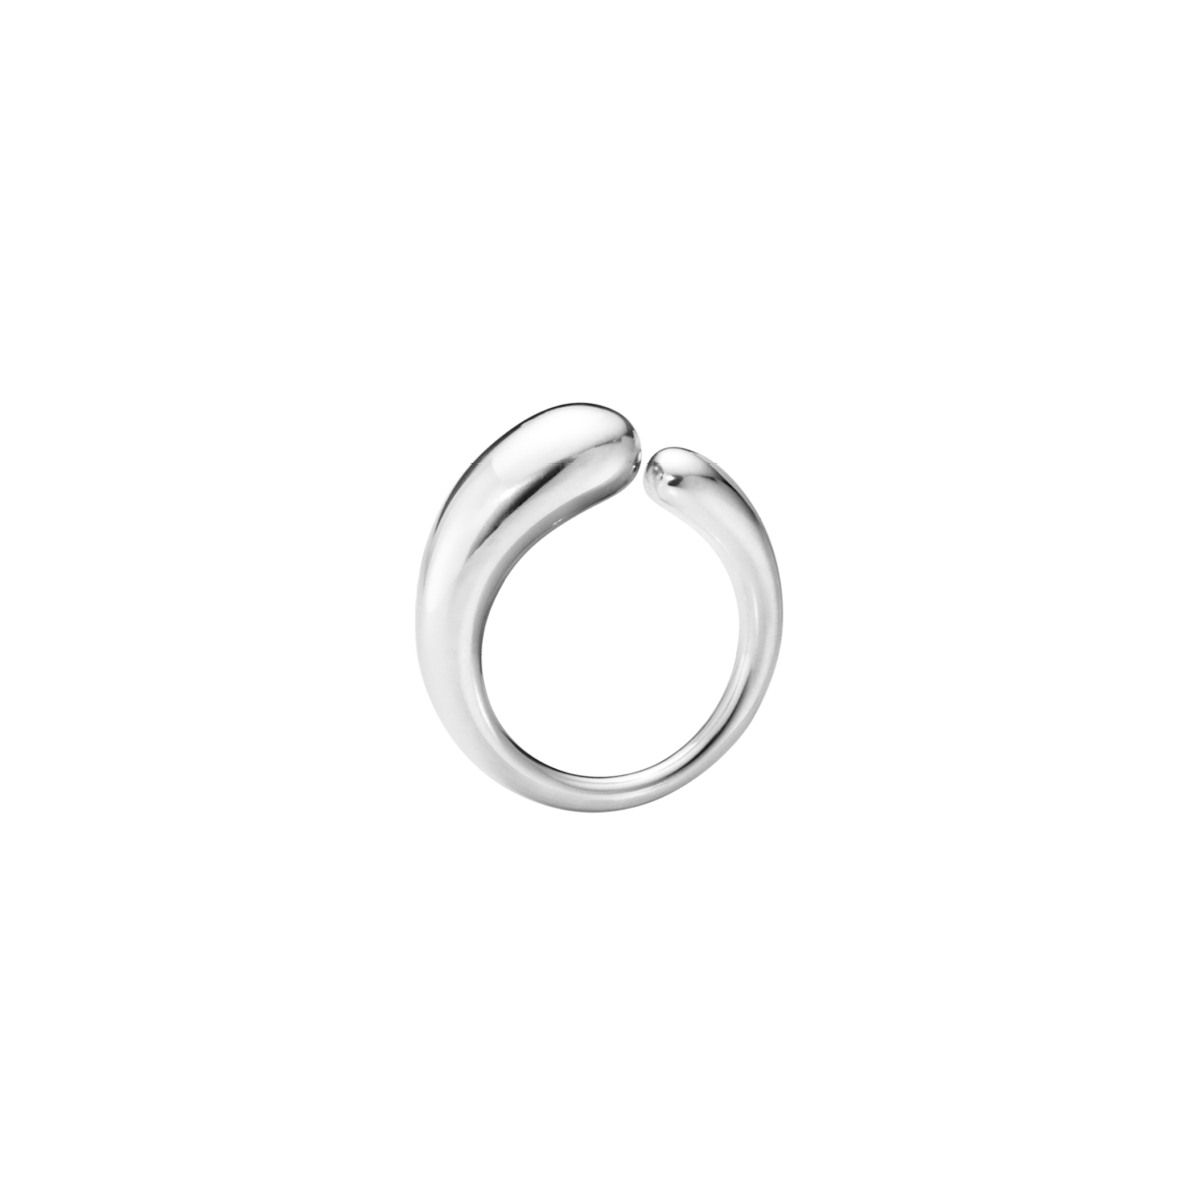 MERCY small, simple ring in sterling silver | Georg Jensen